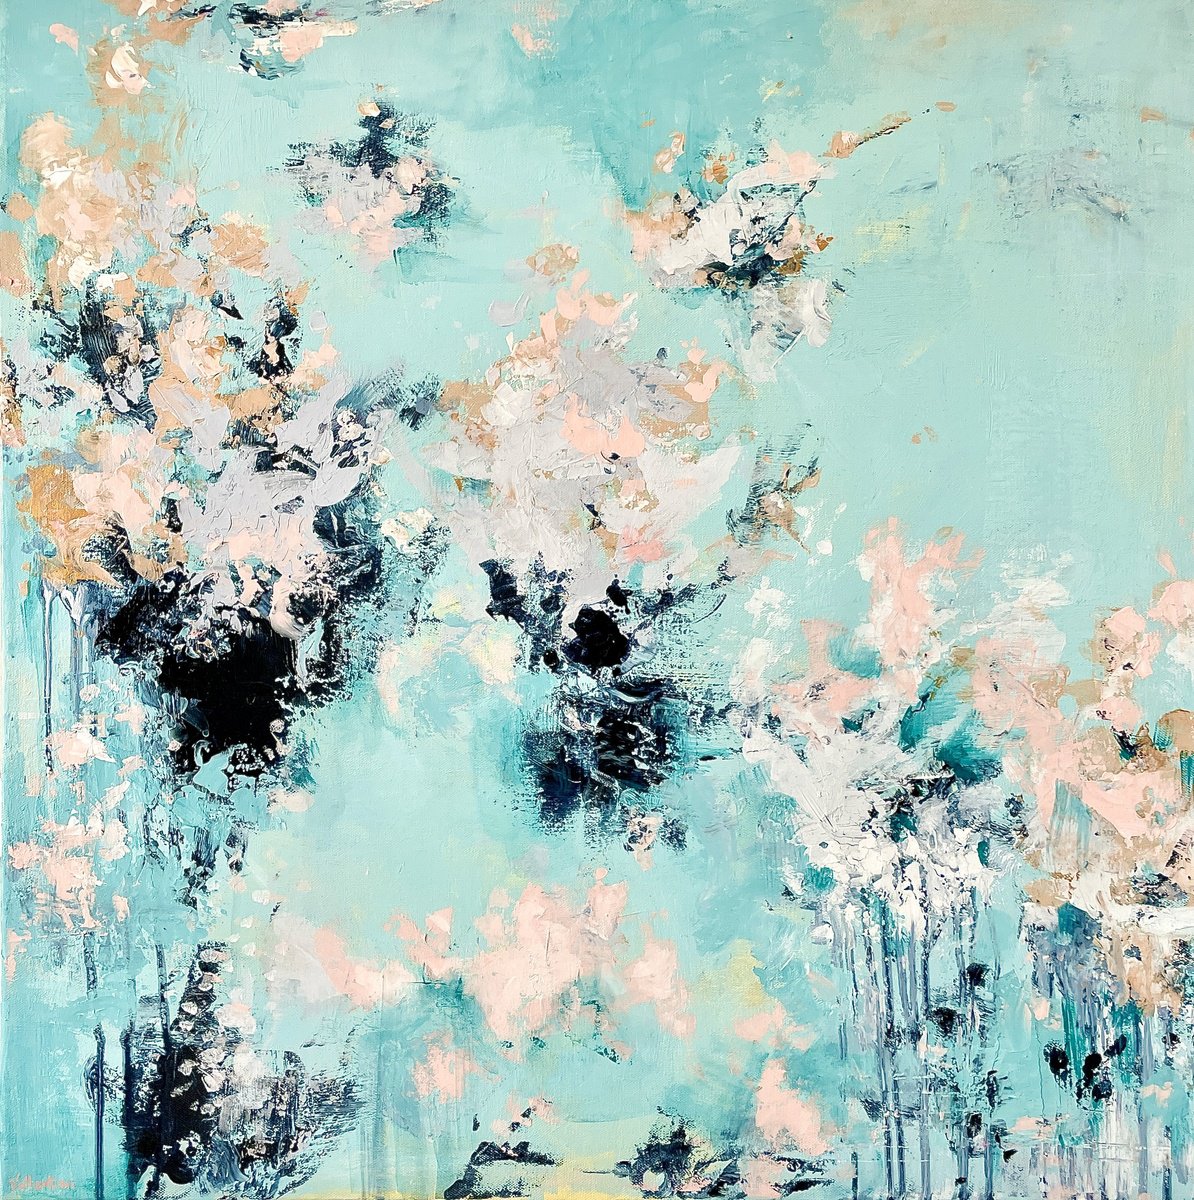 JOYFUL DAY - 70 x70 CM - ASTRACT PAINTING ON CANVAS * BRIGHT GREEN * TURQUOISE * SOFT PINK by Jani Vallentimi